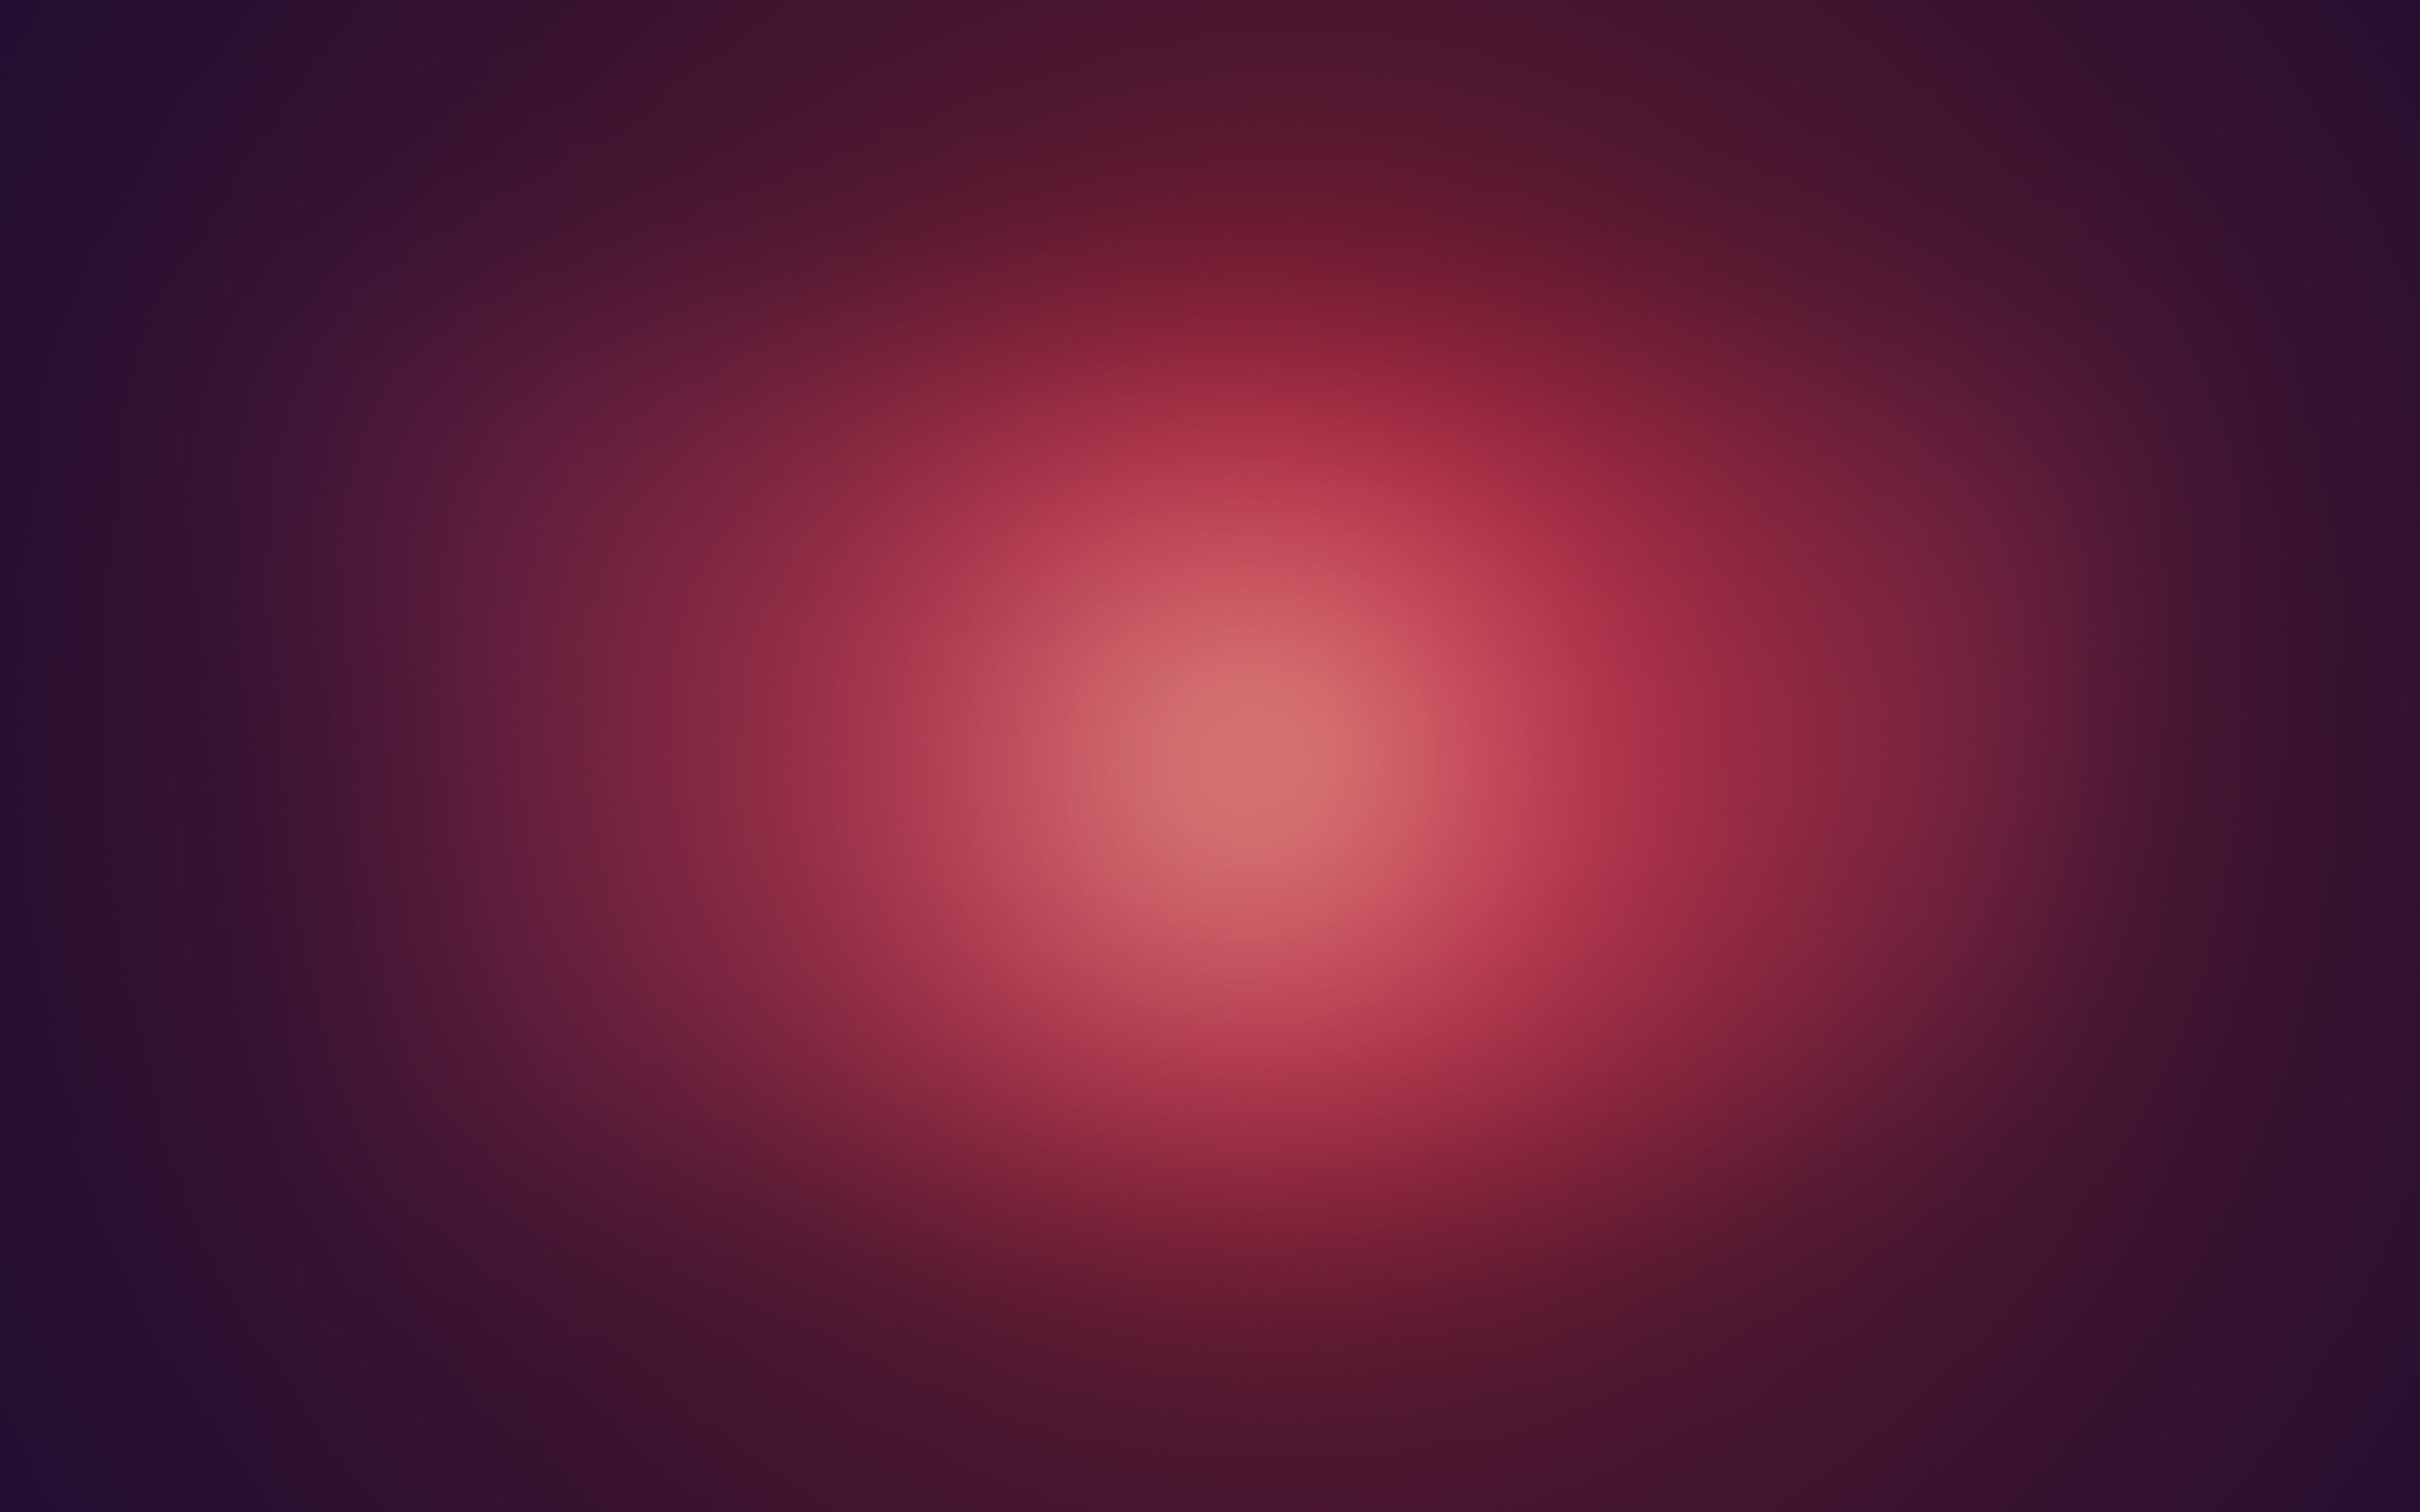 gradient, minimalism, backgrounds, spotlight, abstract, red